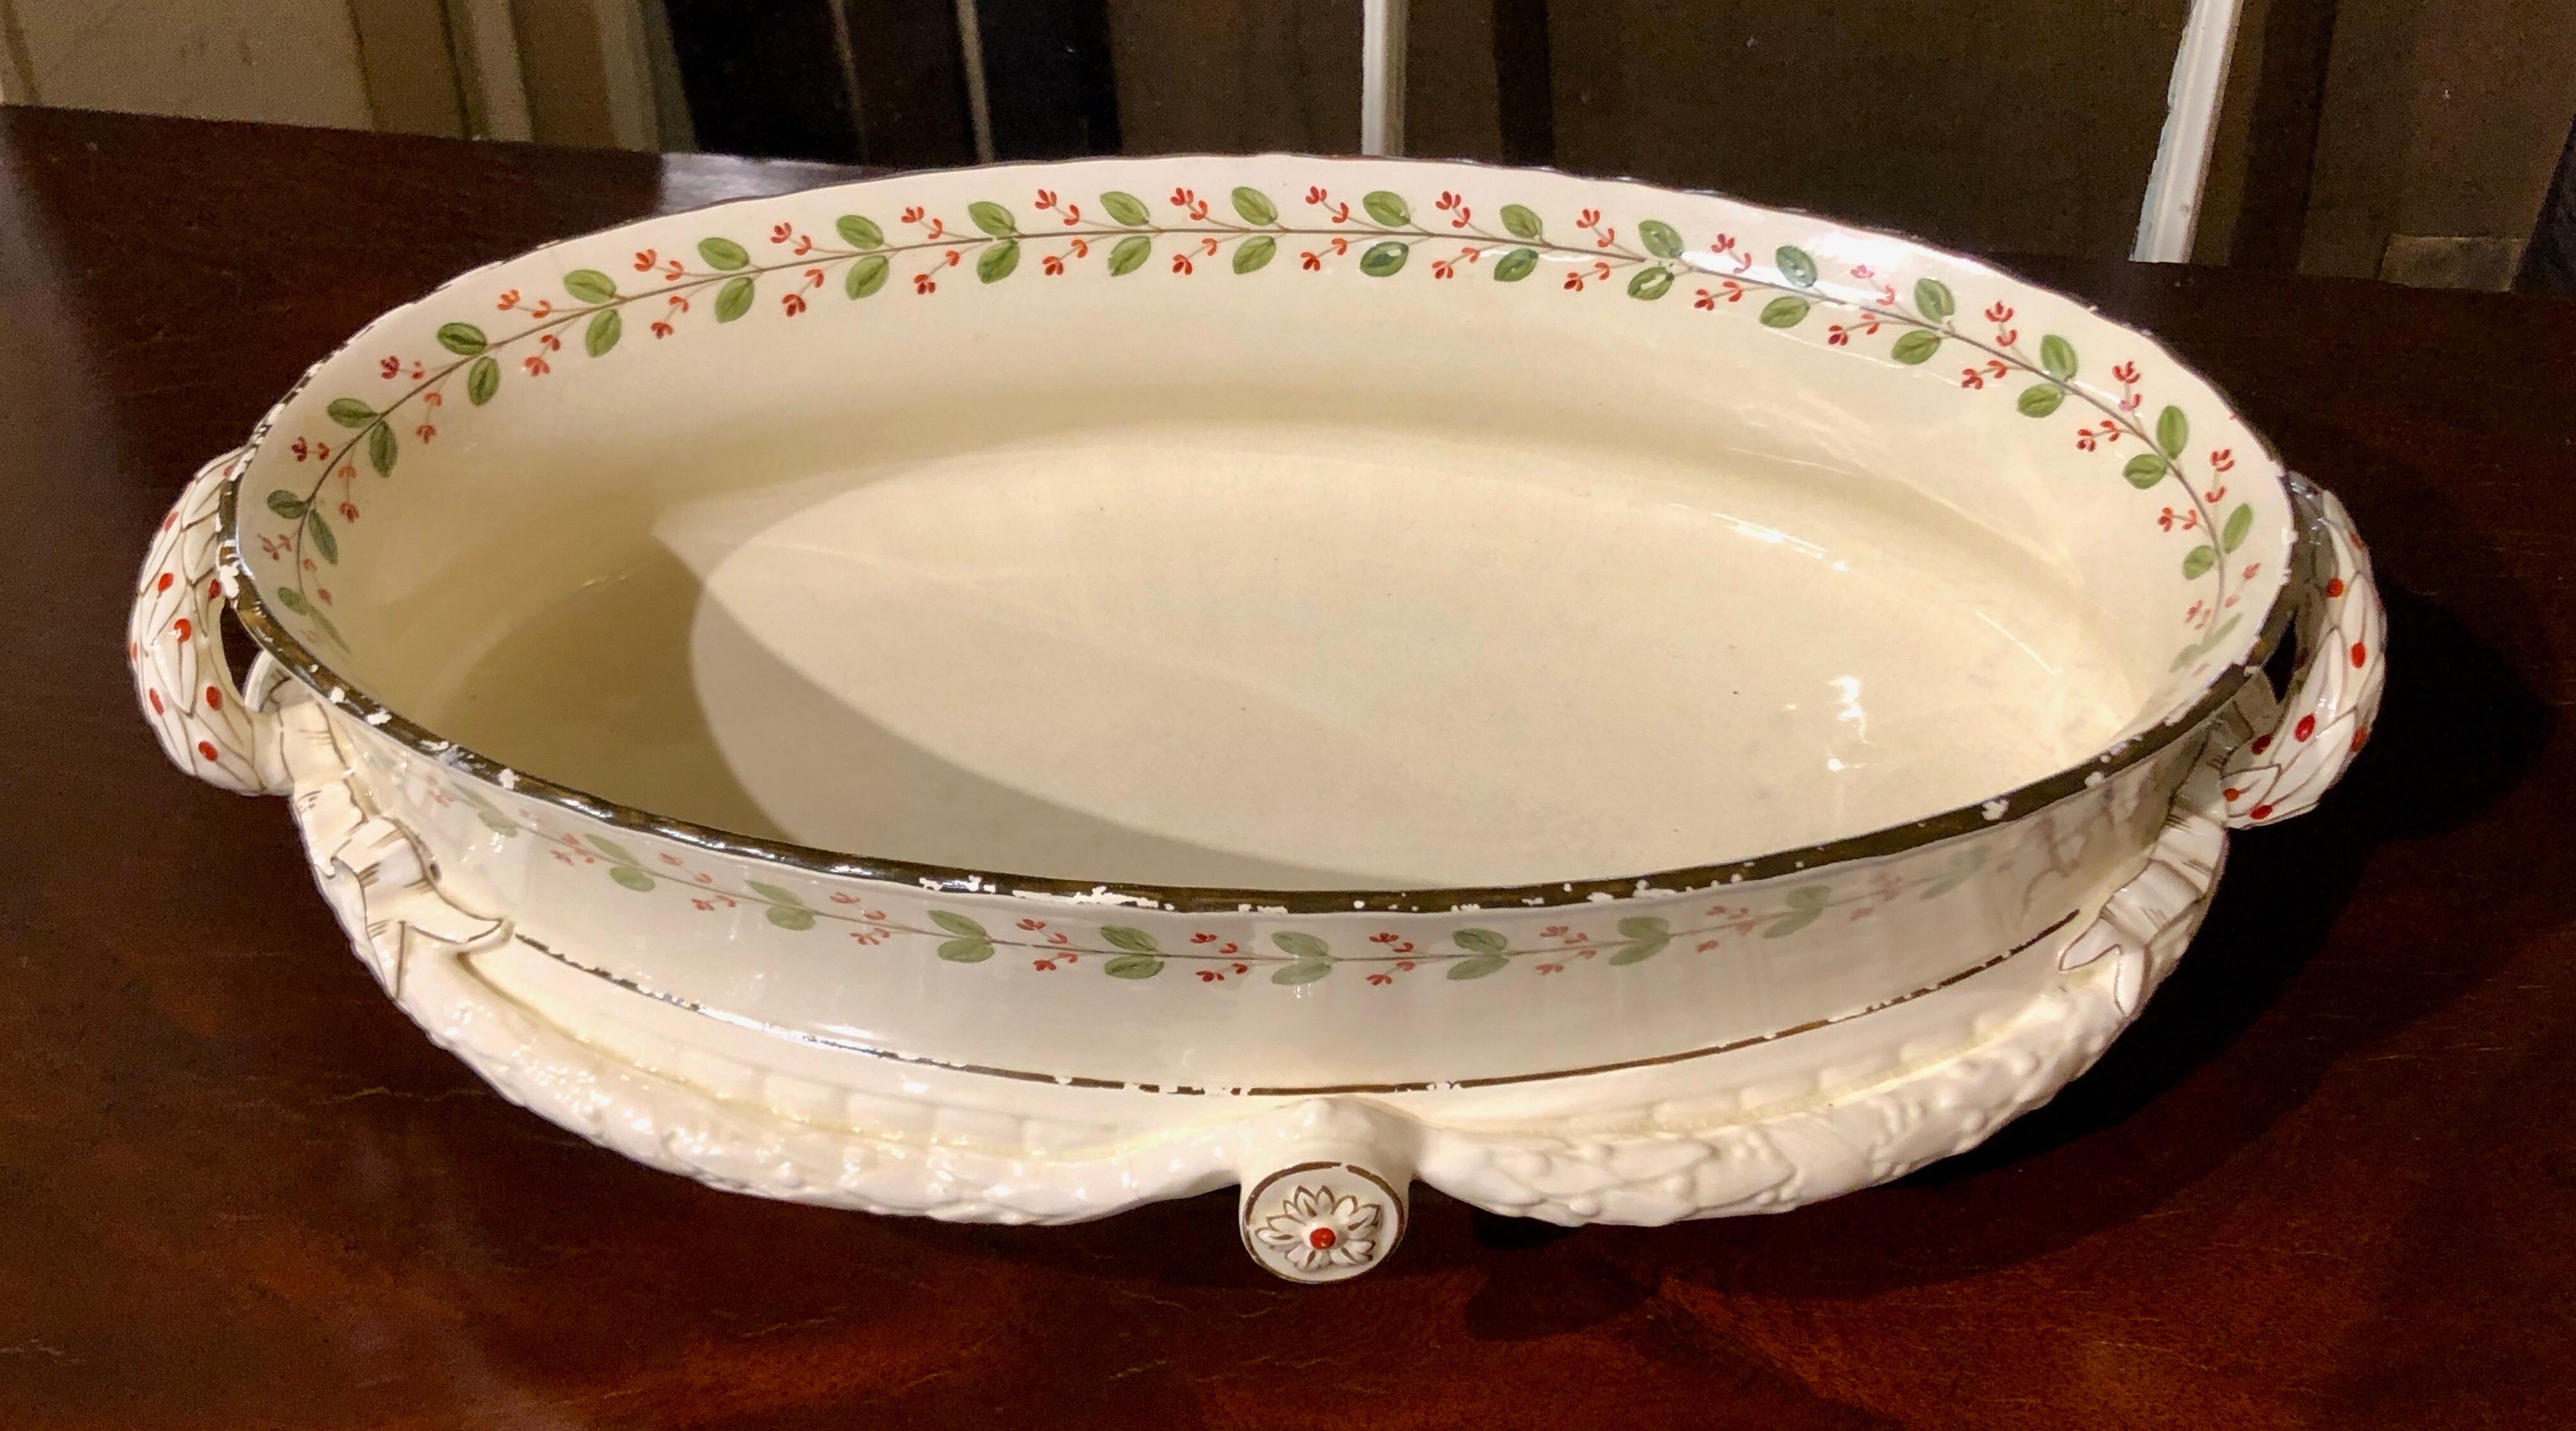 George III Rare Large Antique English Early 19th C. Wedgwood Queensware 'Creamware' Bowl For Sale